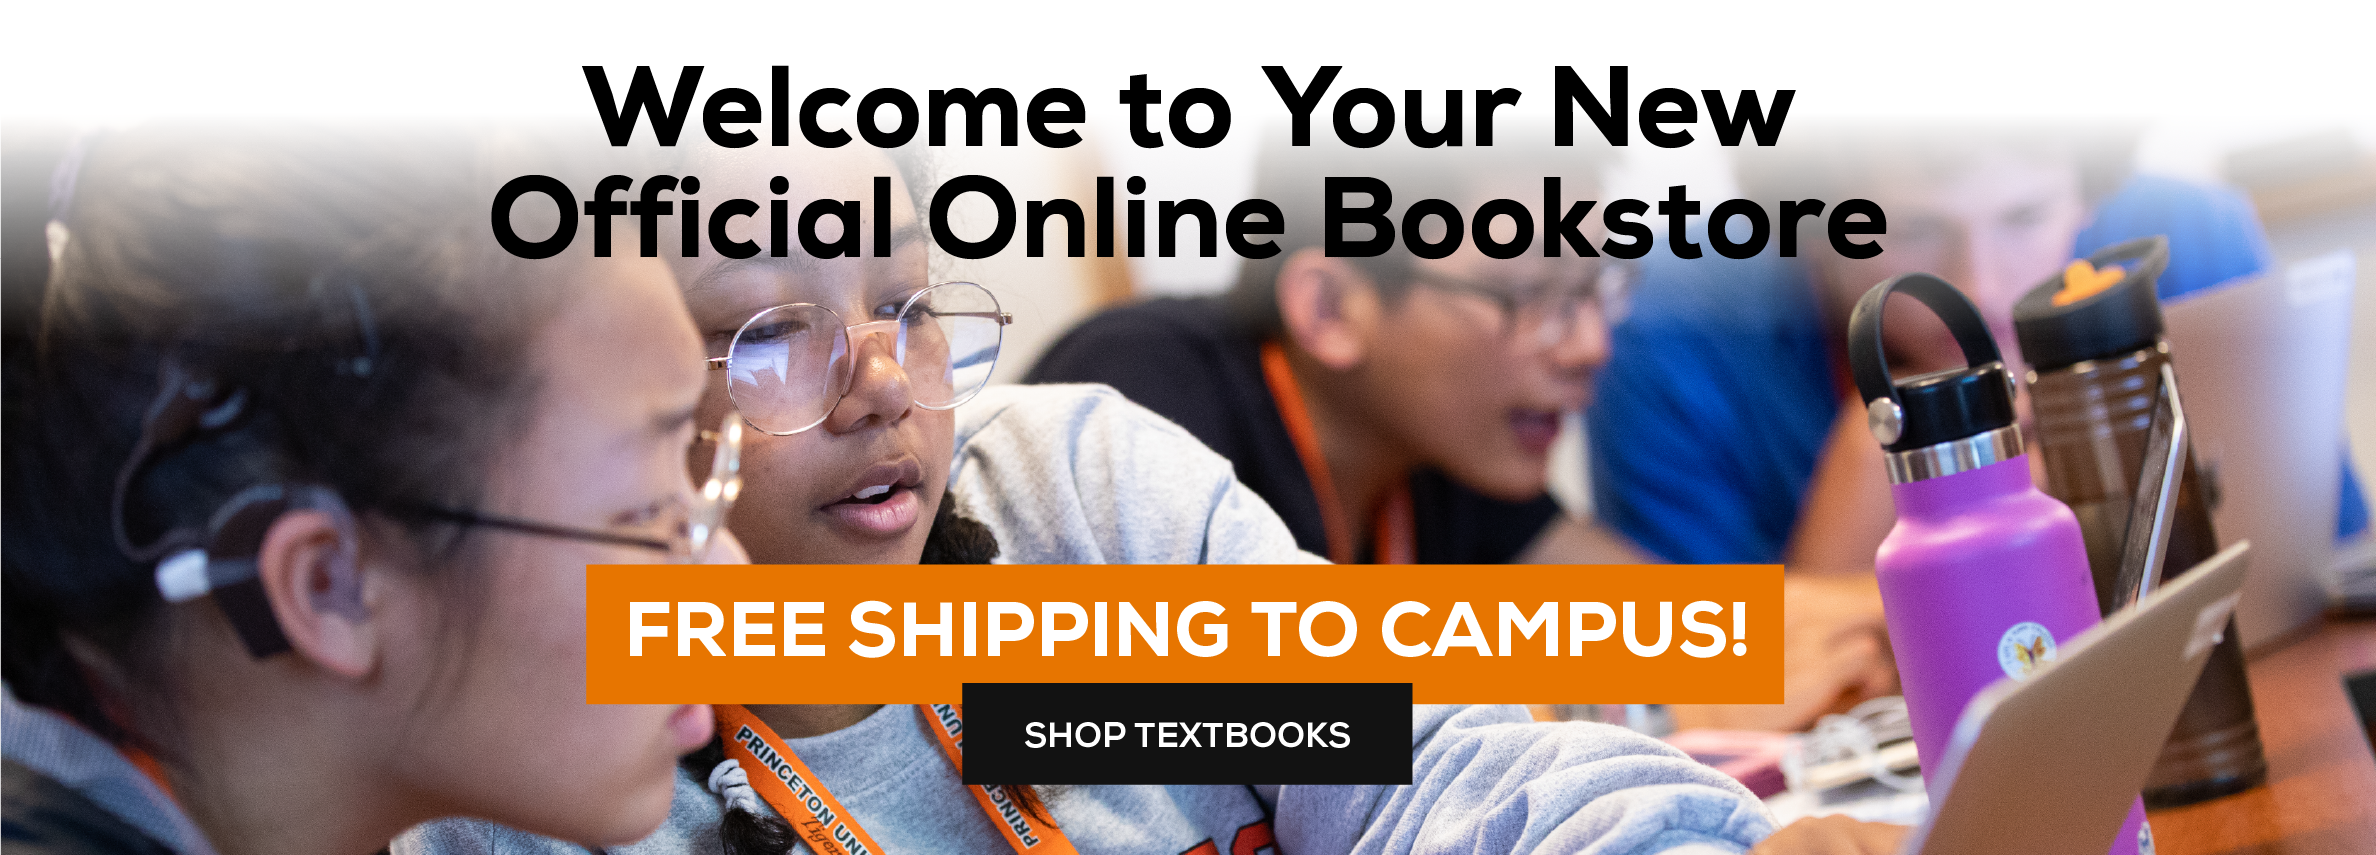 Welcome to your NEW Official Online Bookstore. Free shipping to campus. Shop textbooks.